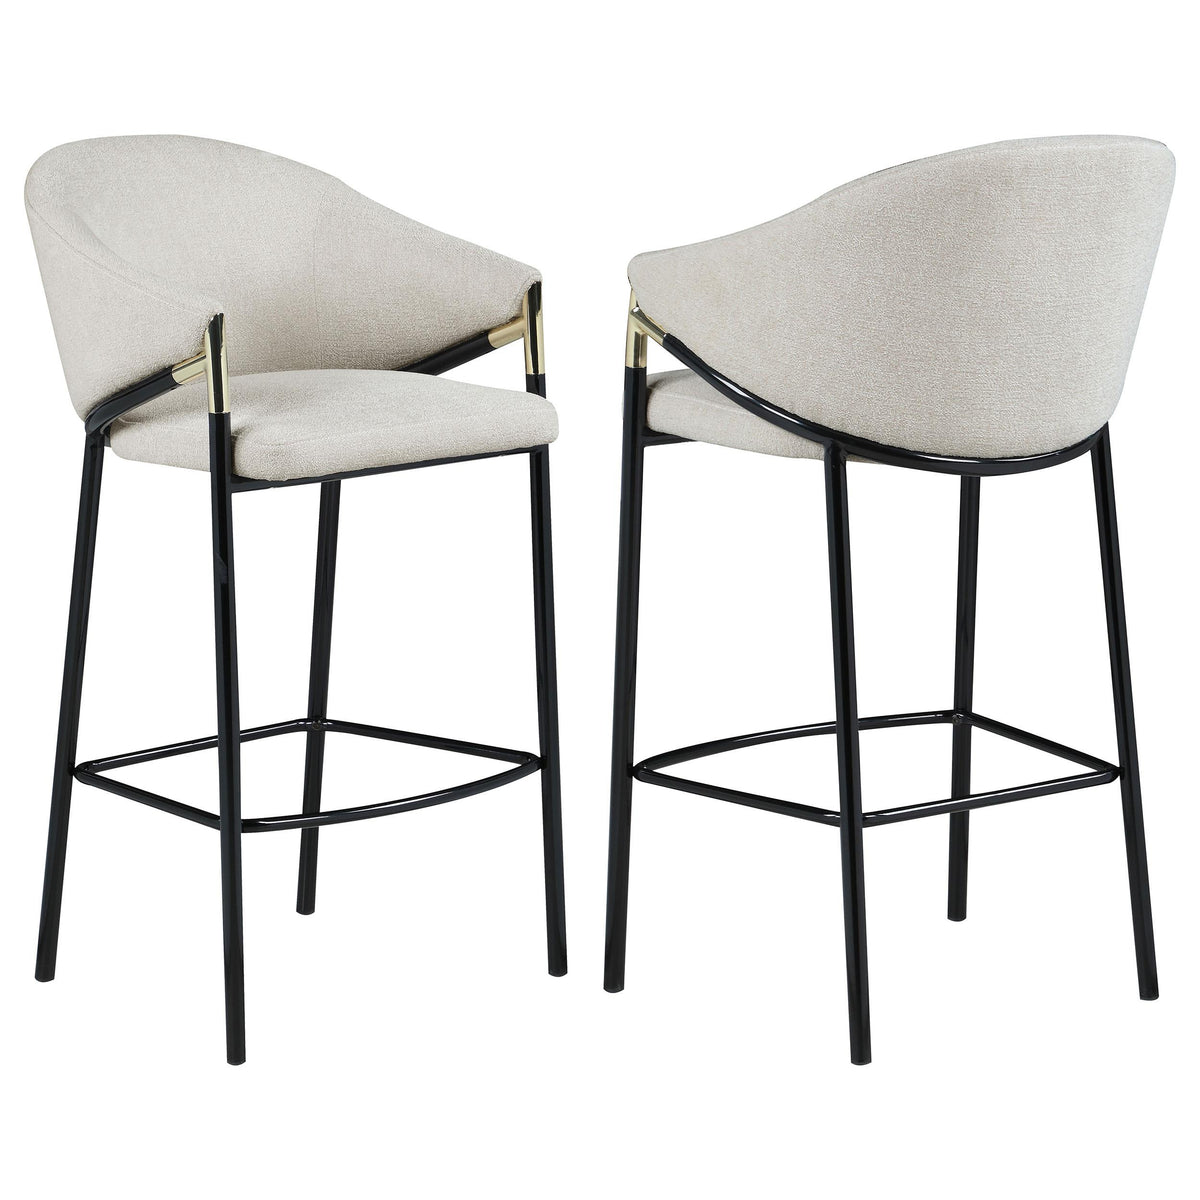 Chadwick Sloped Arm Bar Stools Beige and Glossy Black (Set of 2)  Las Vegas Furniture Stores